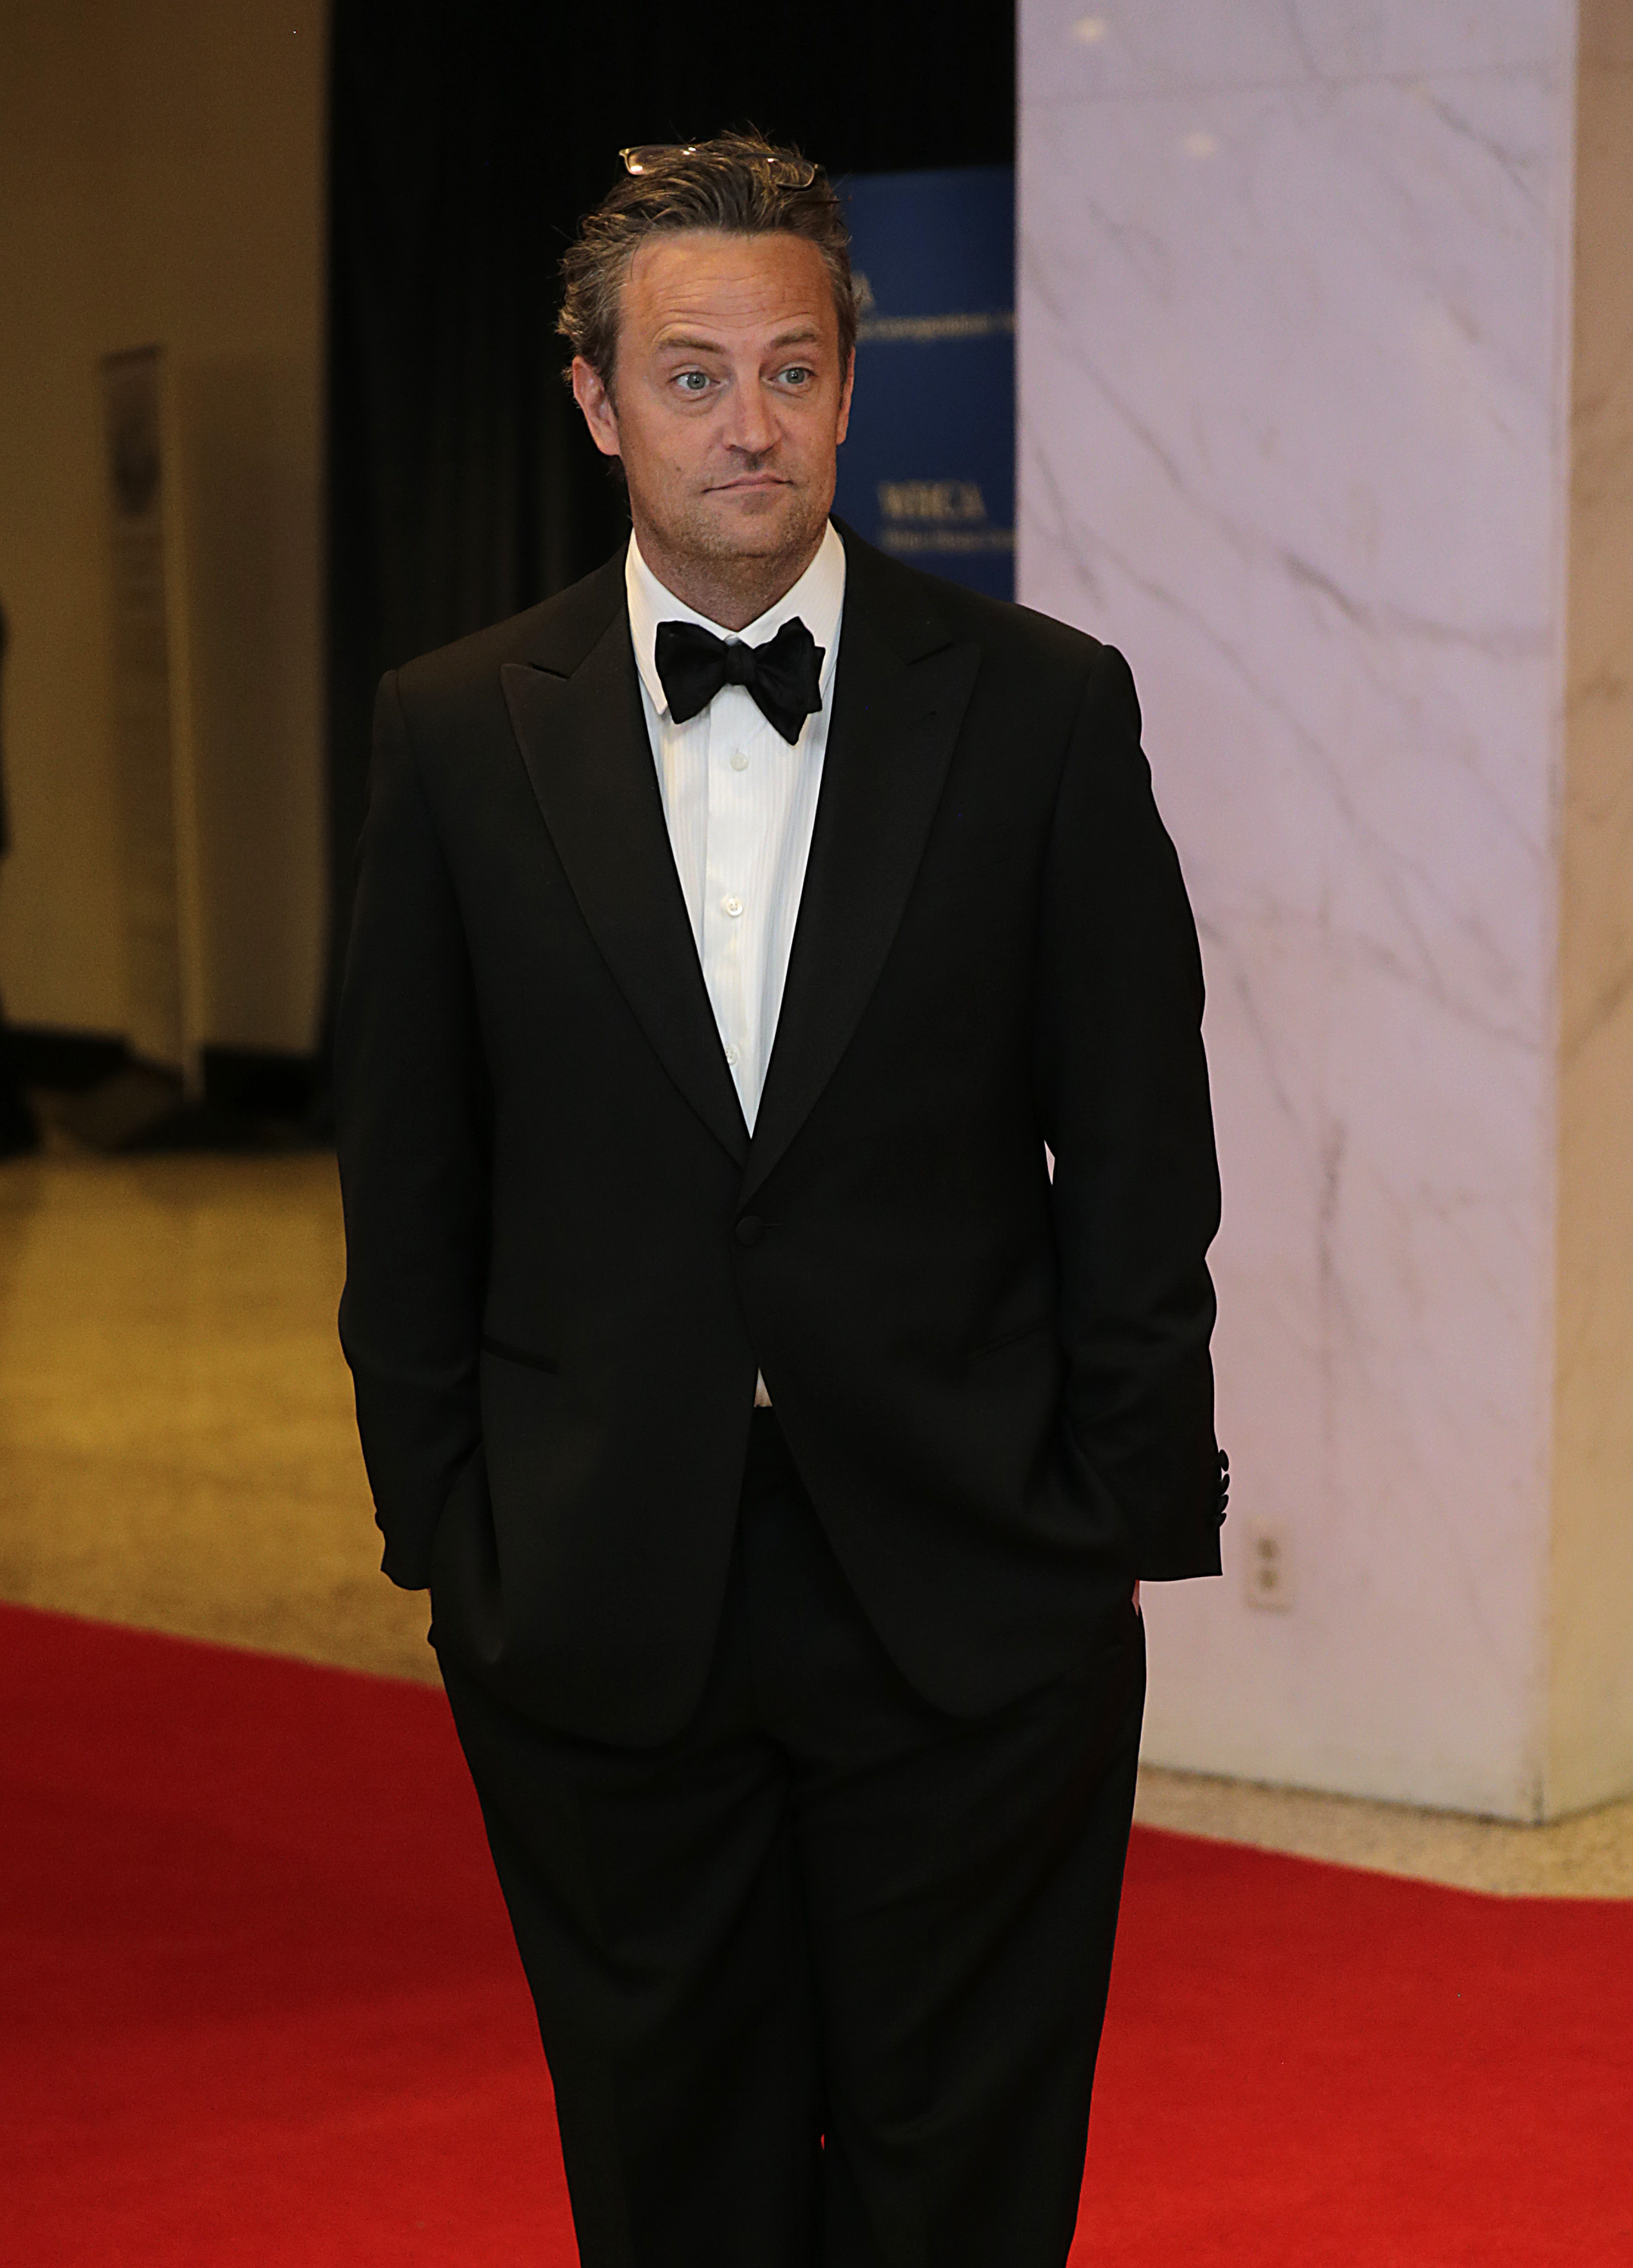 Actor Matthew Perry arrives at the White House Correspondents' Association (WHCA) dinner in Washington, D.C., U.S., on Saturday, April 27, 2013. (Bloomberg&mdash;Bloomberg via Getty Images)